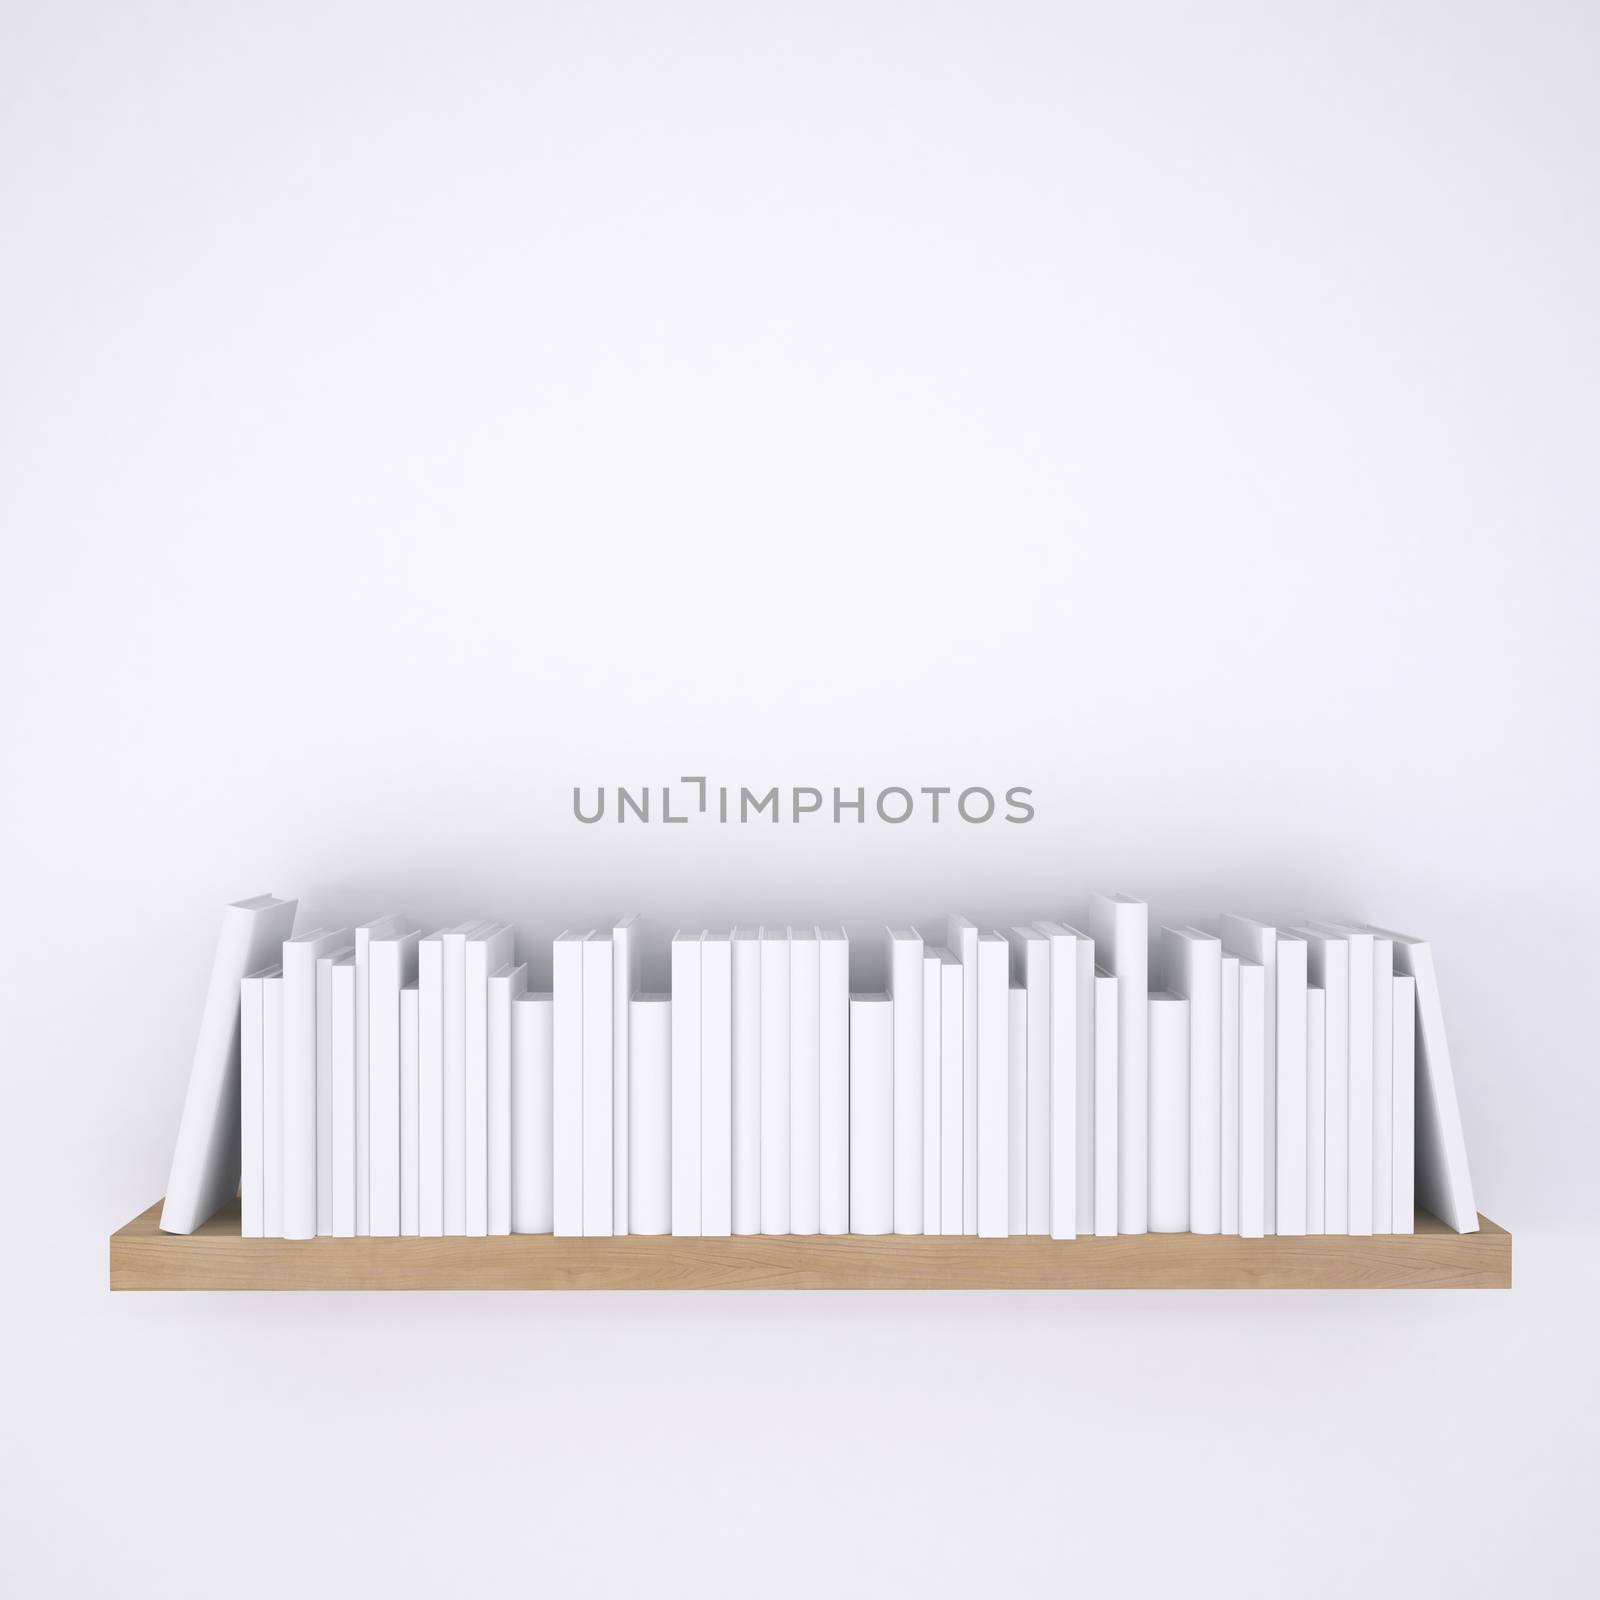 Wooden shelf with books on white wall background by cherezoff